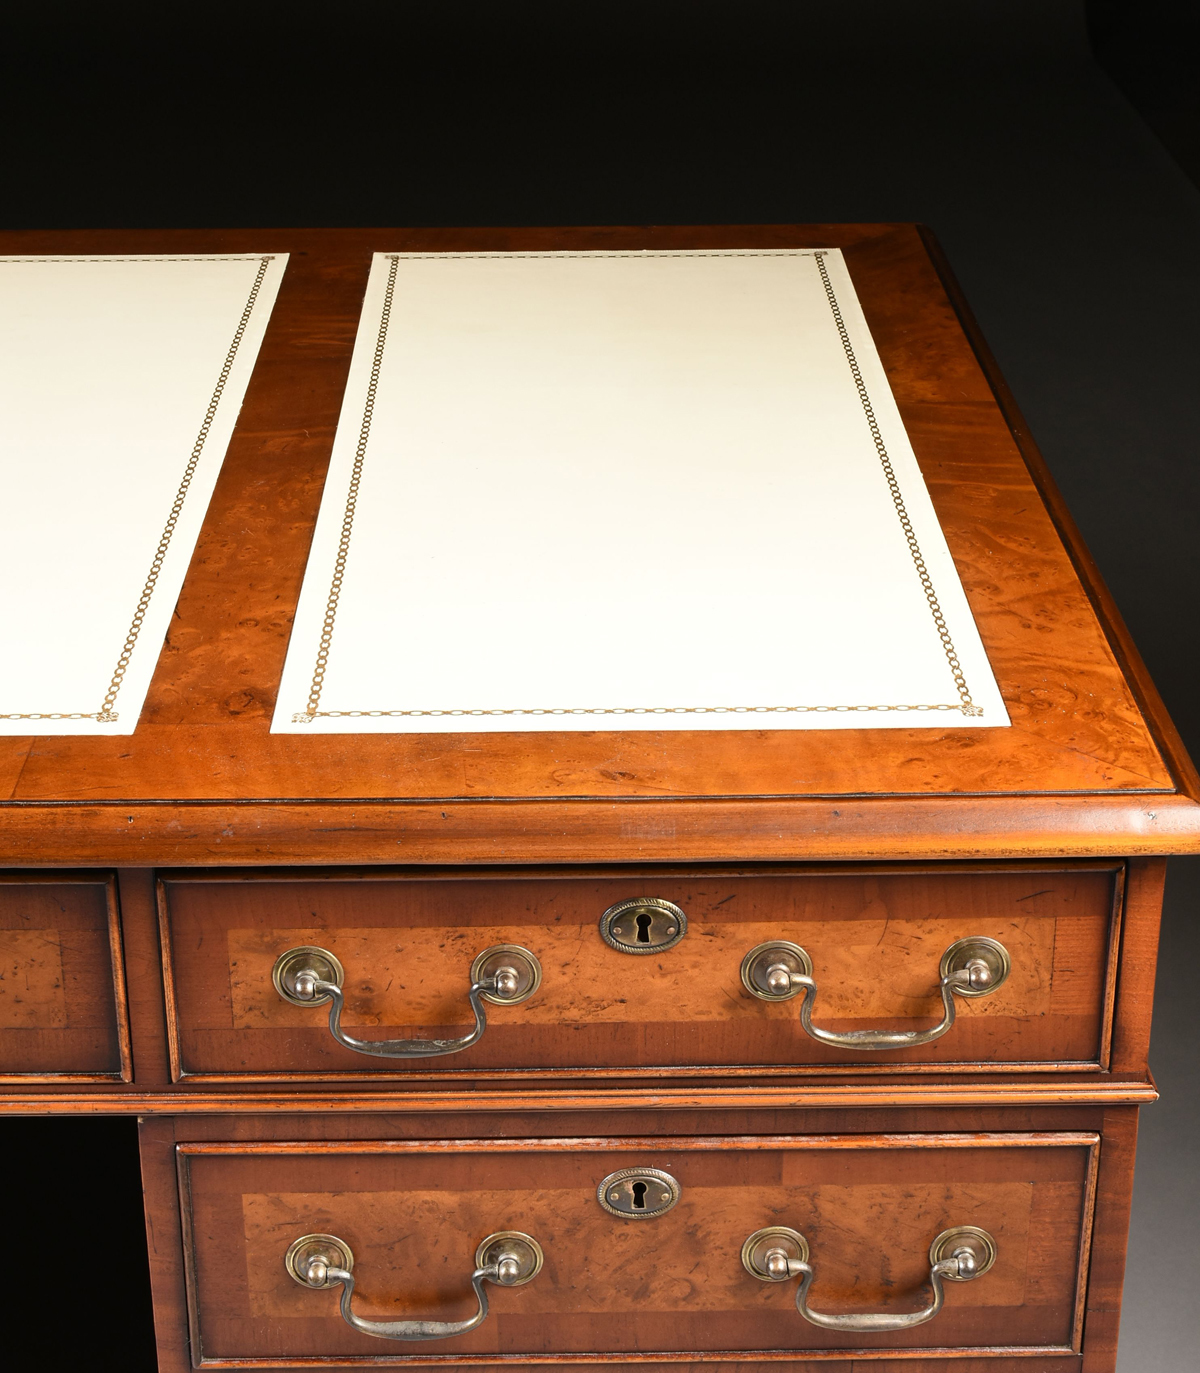 A GEORGE II STYLE WALNUT WHITE LEATHER TOP PARTNER'S DESK, ENGLISH, MID 20TH CENTURY, modeled - Image 14 of 16